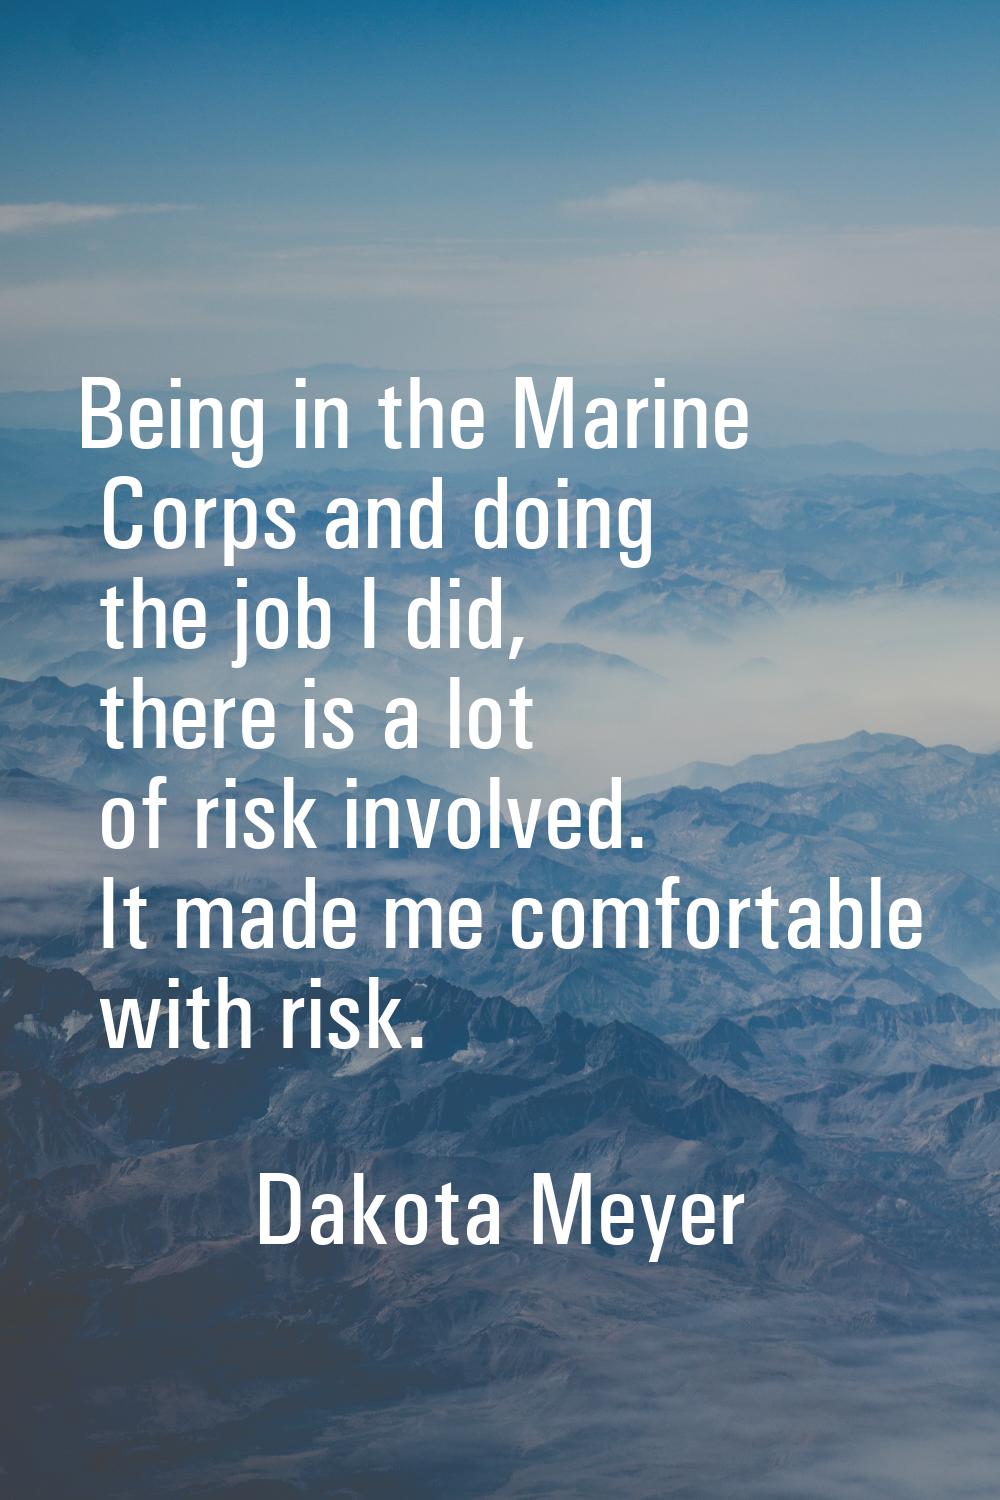 Being in the Marine Corps and doing the job I did, there is a lot of risk involved. It made me comf